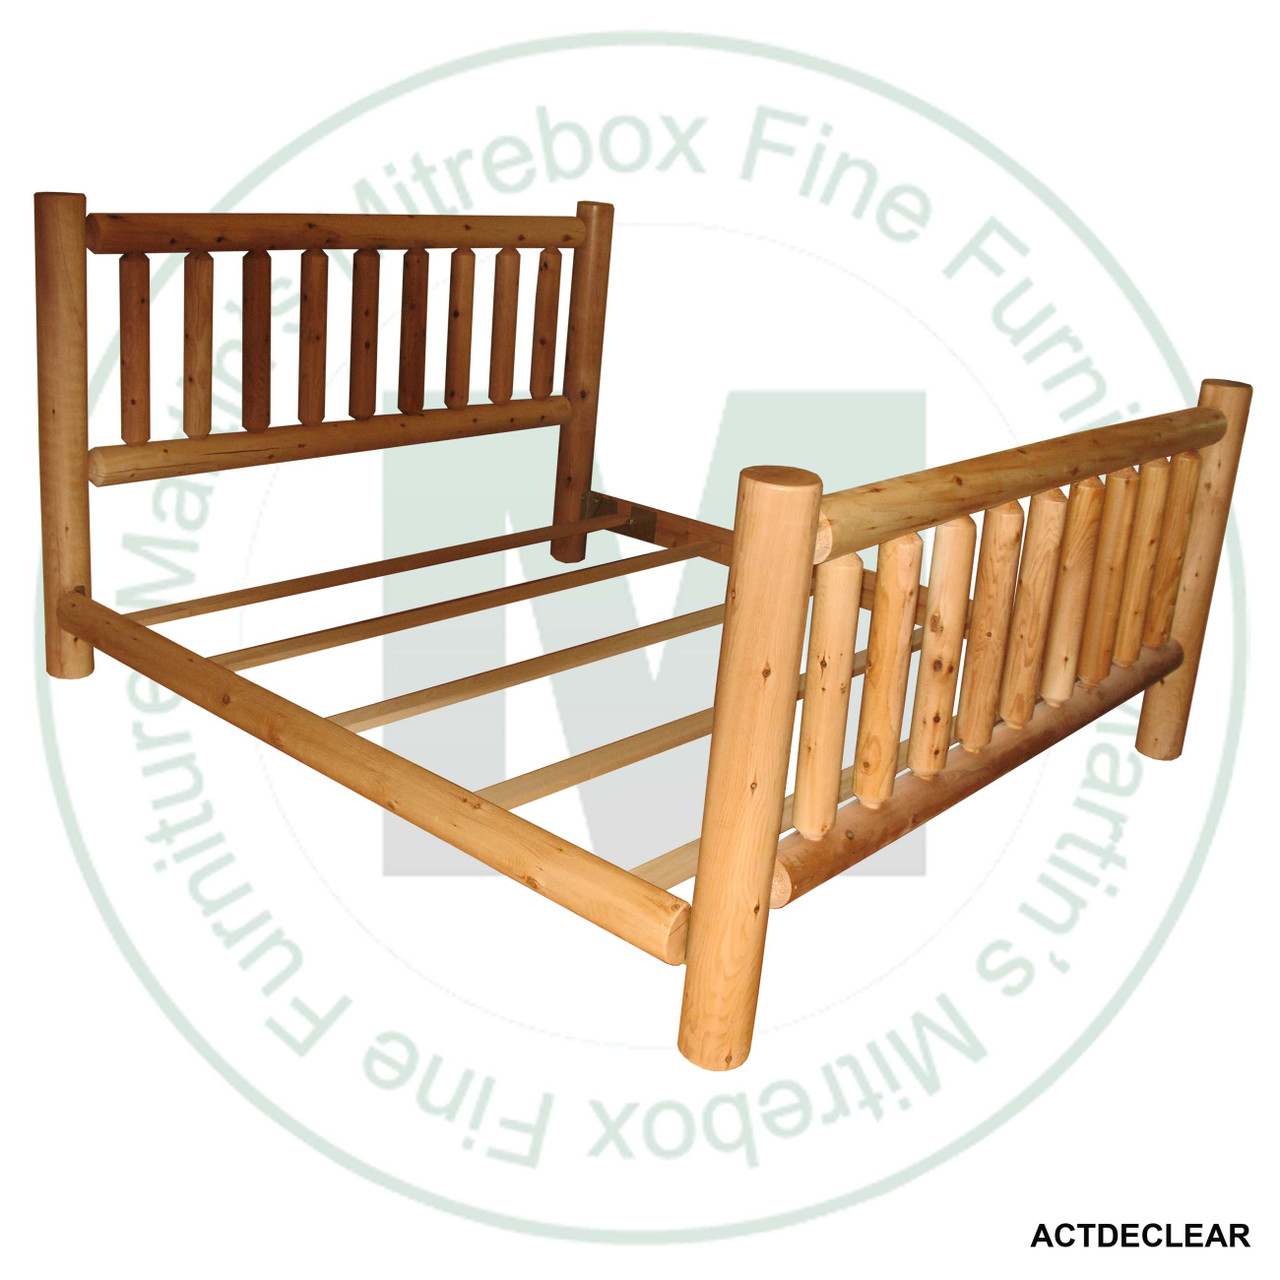 Northern Lakes Log Single Traditional Bed